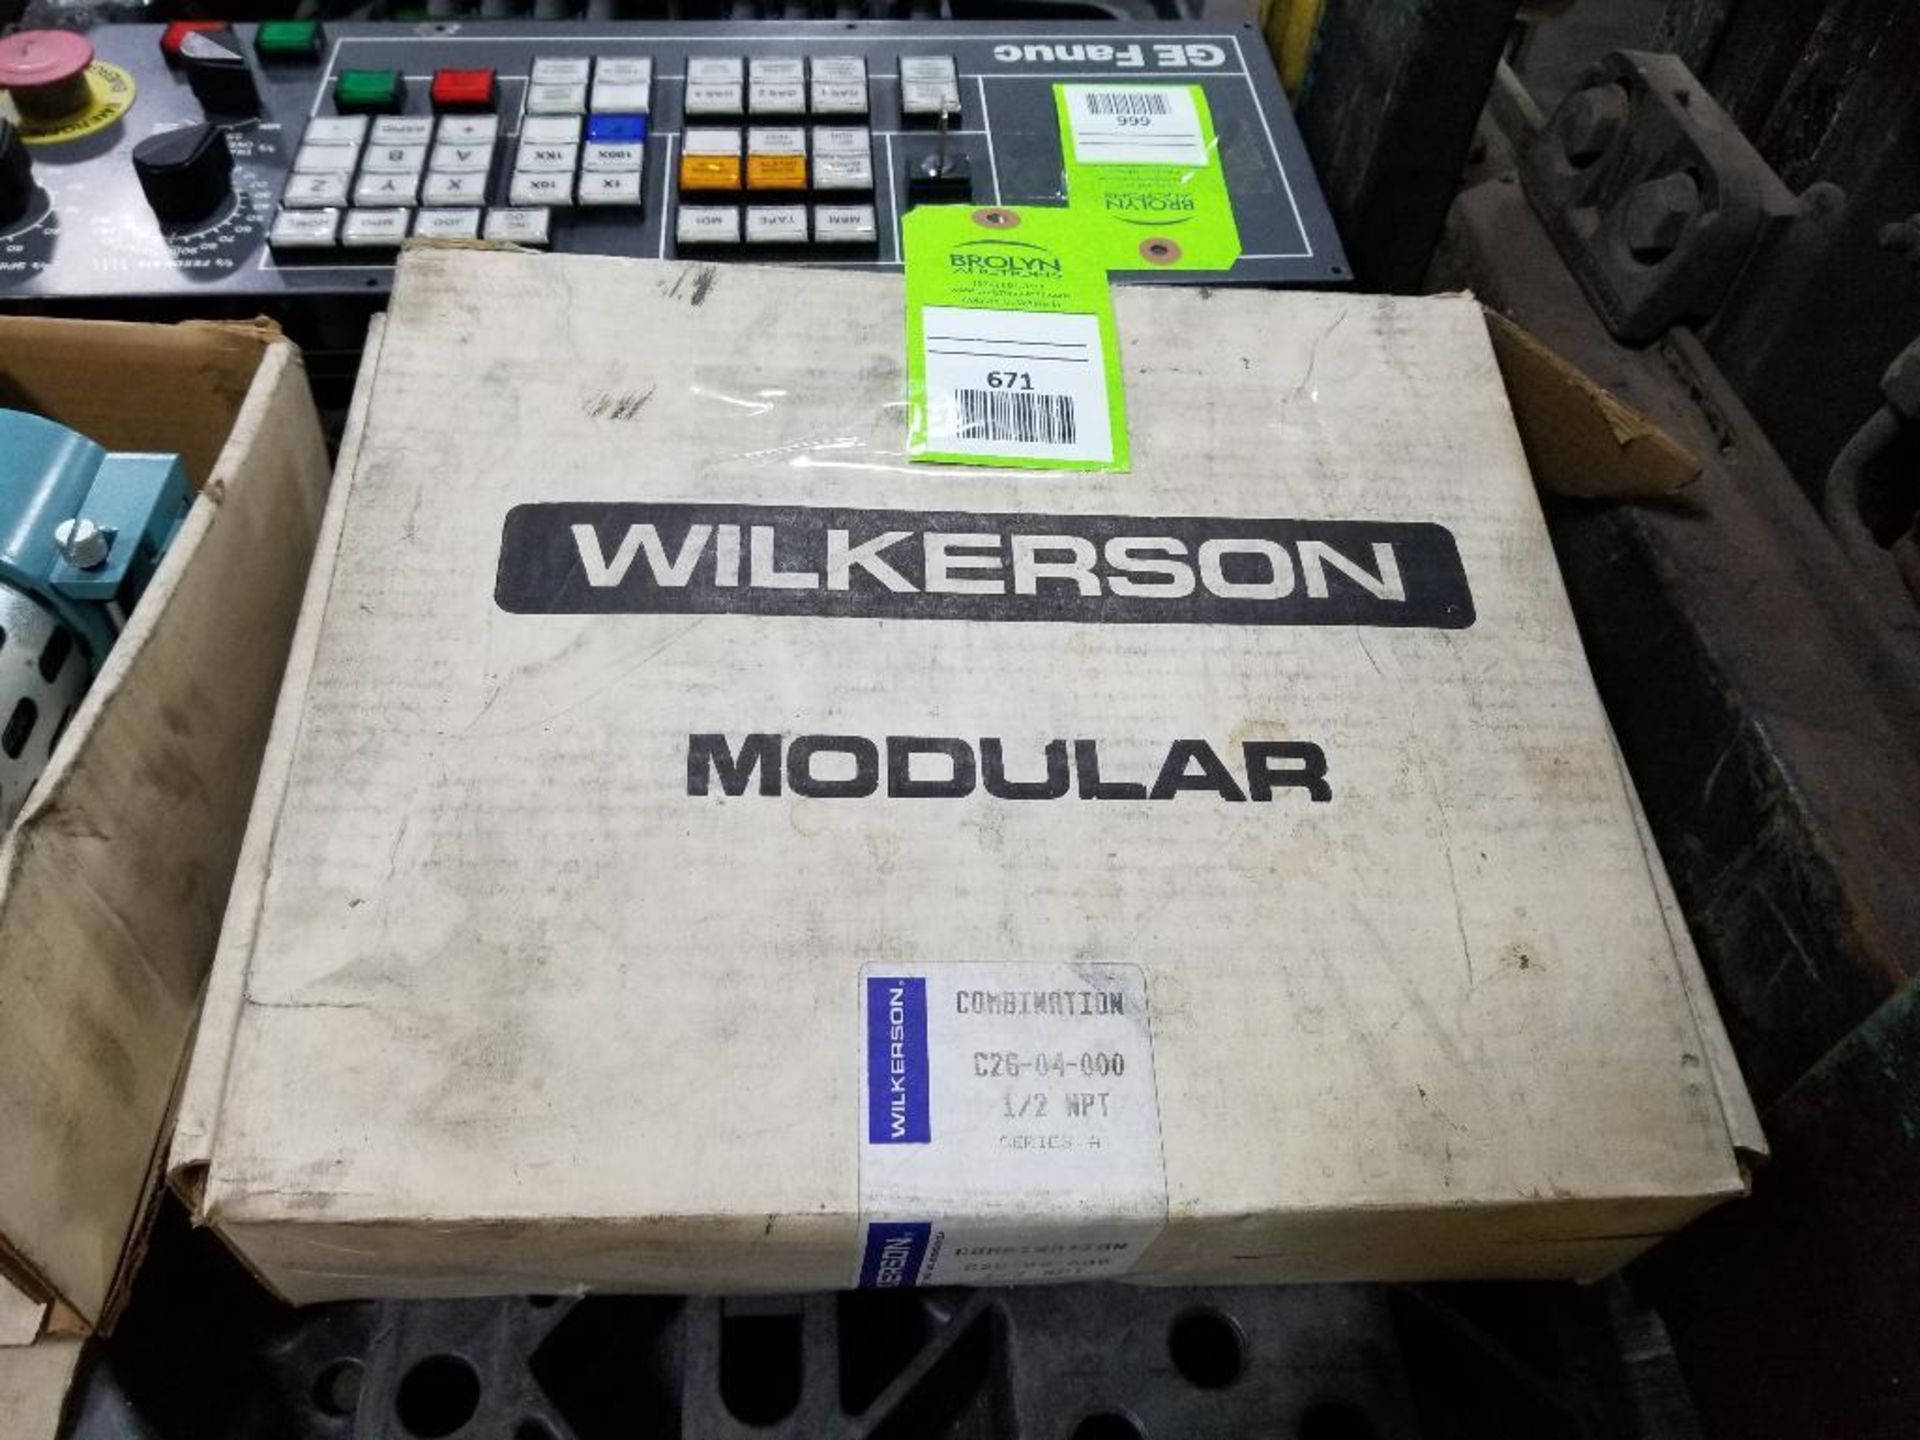 Wilkerson combination filter lubrication unit. Part number C26-04-000. New in box.